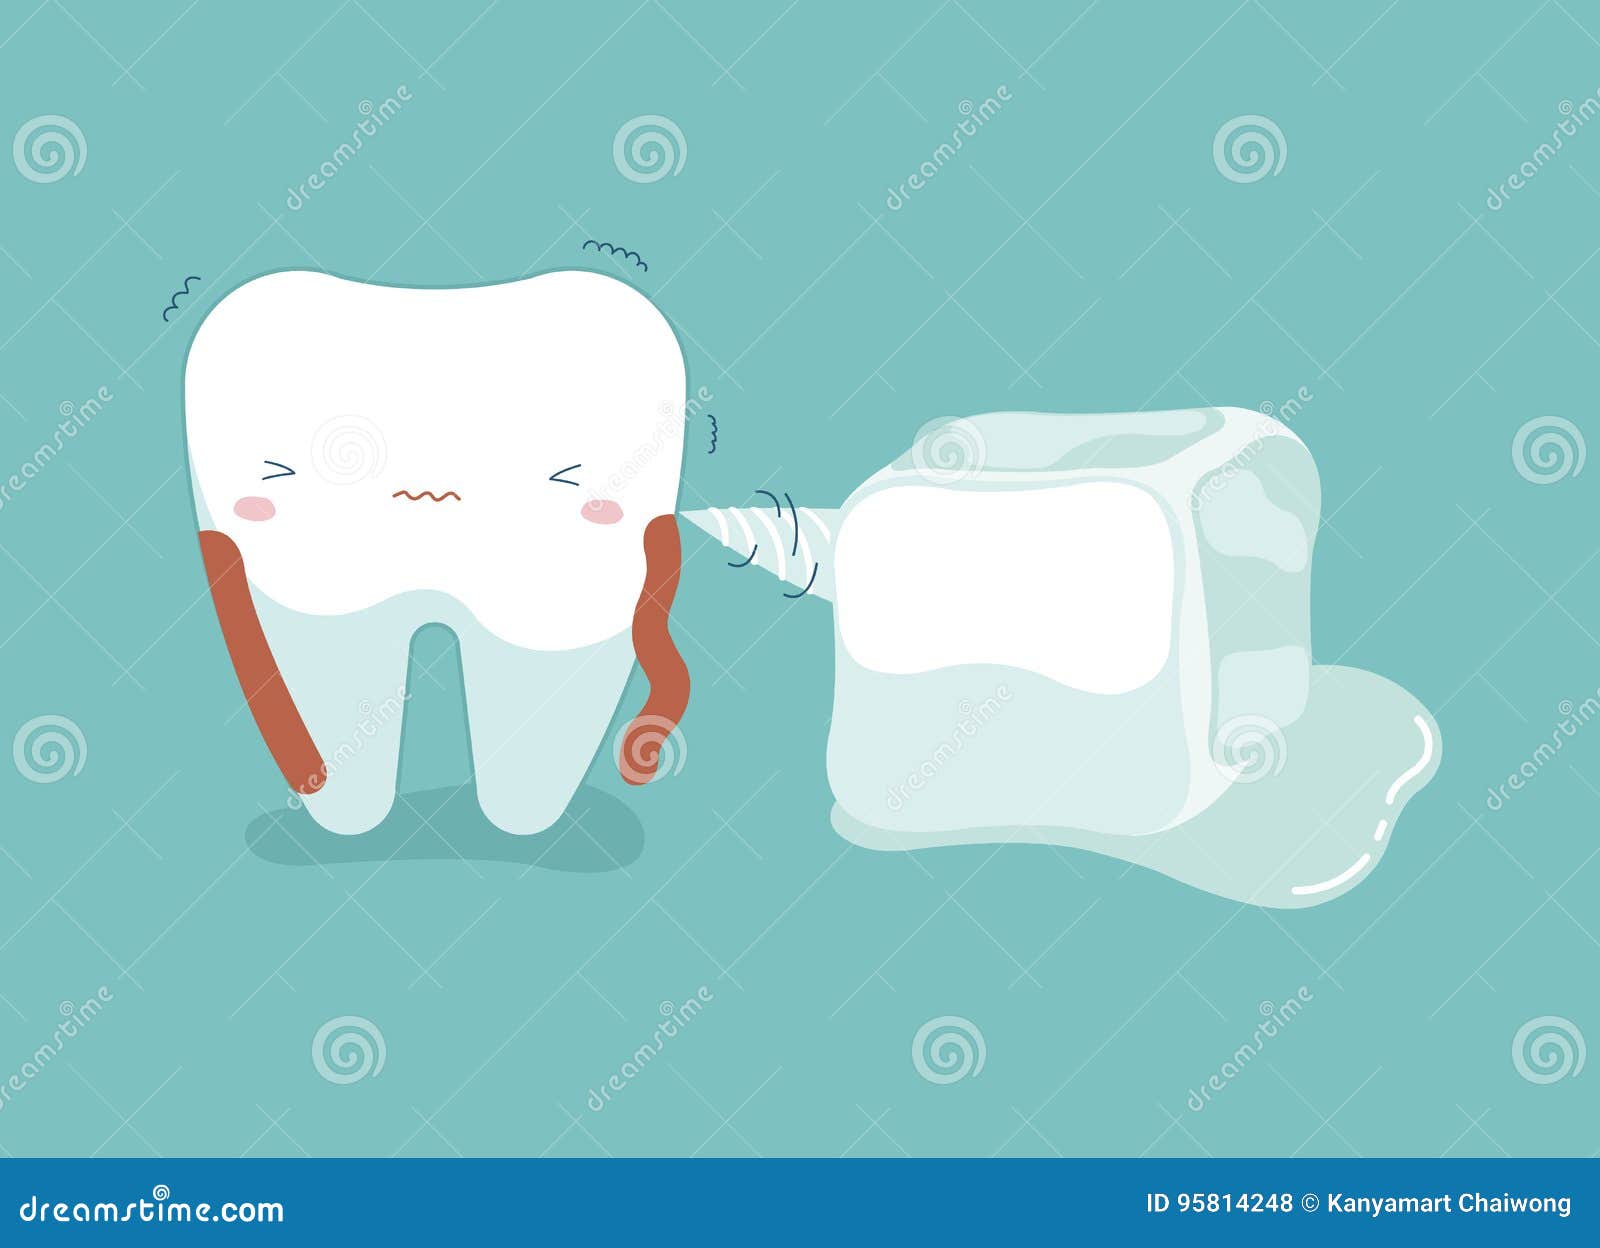 hyper-sensitive tooth ,teeth and tooth concept of dental